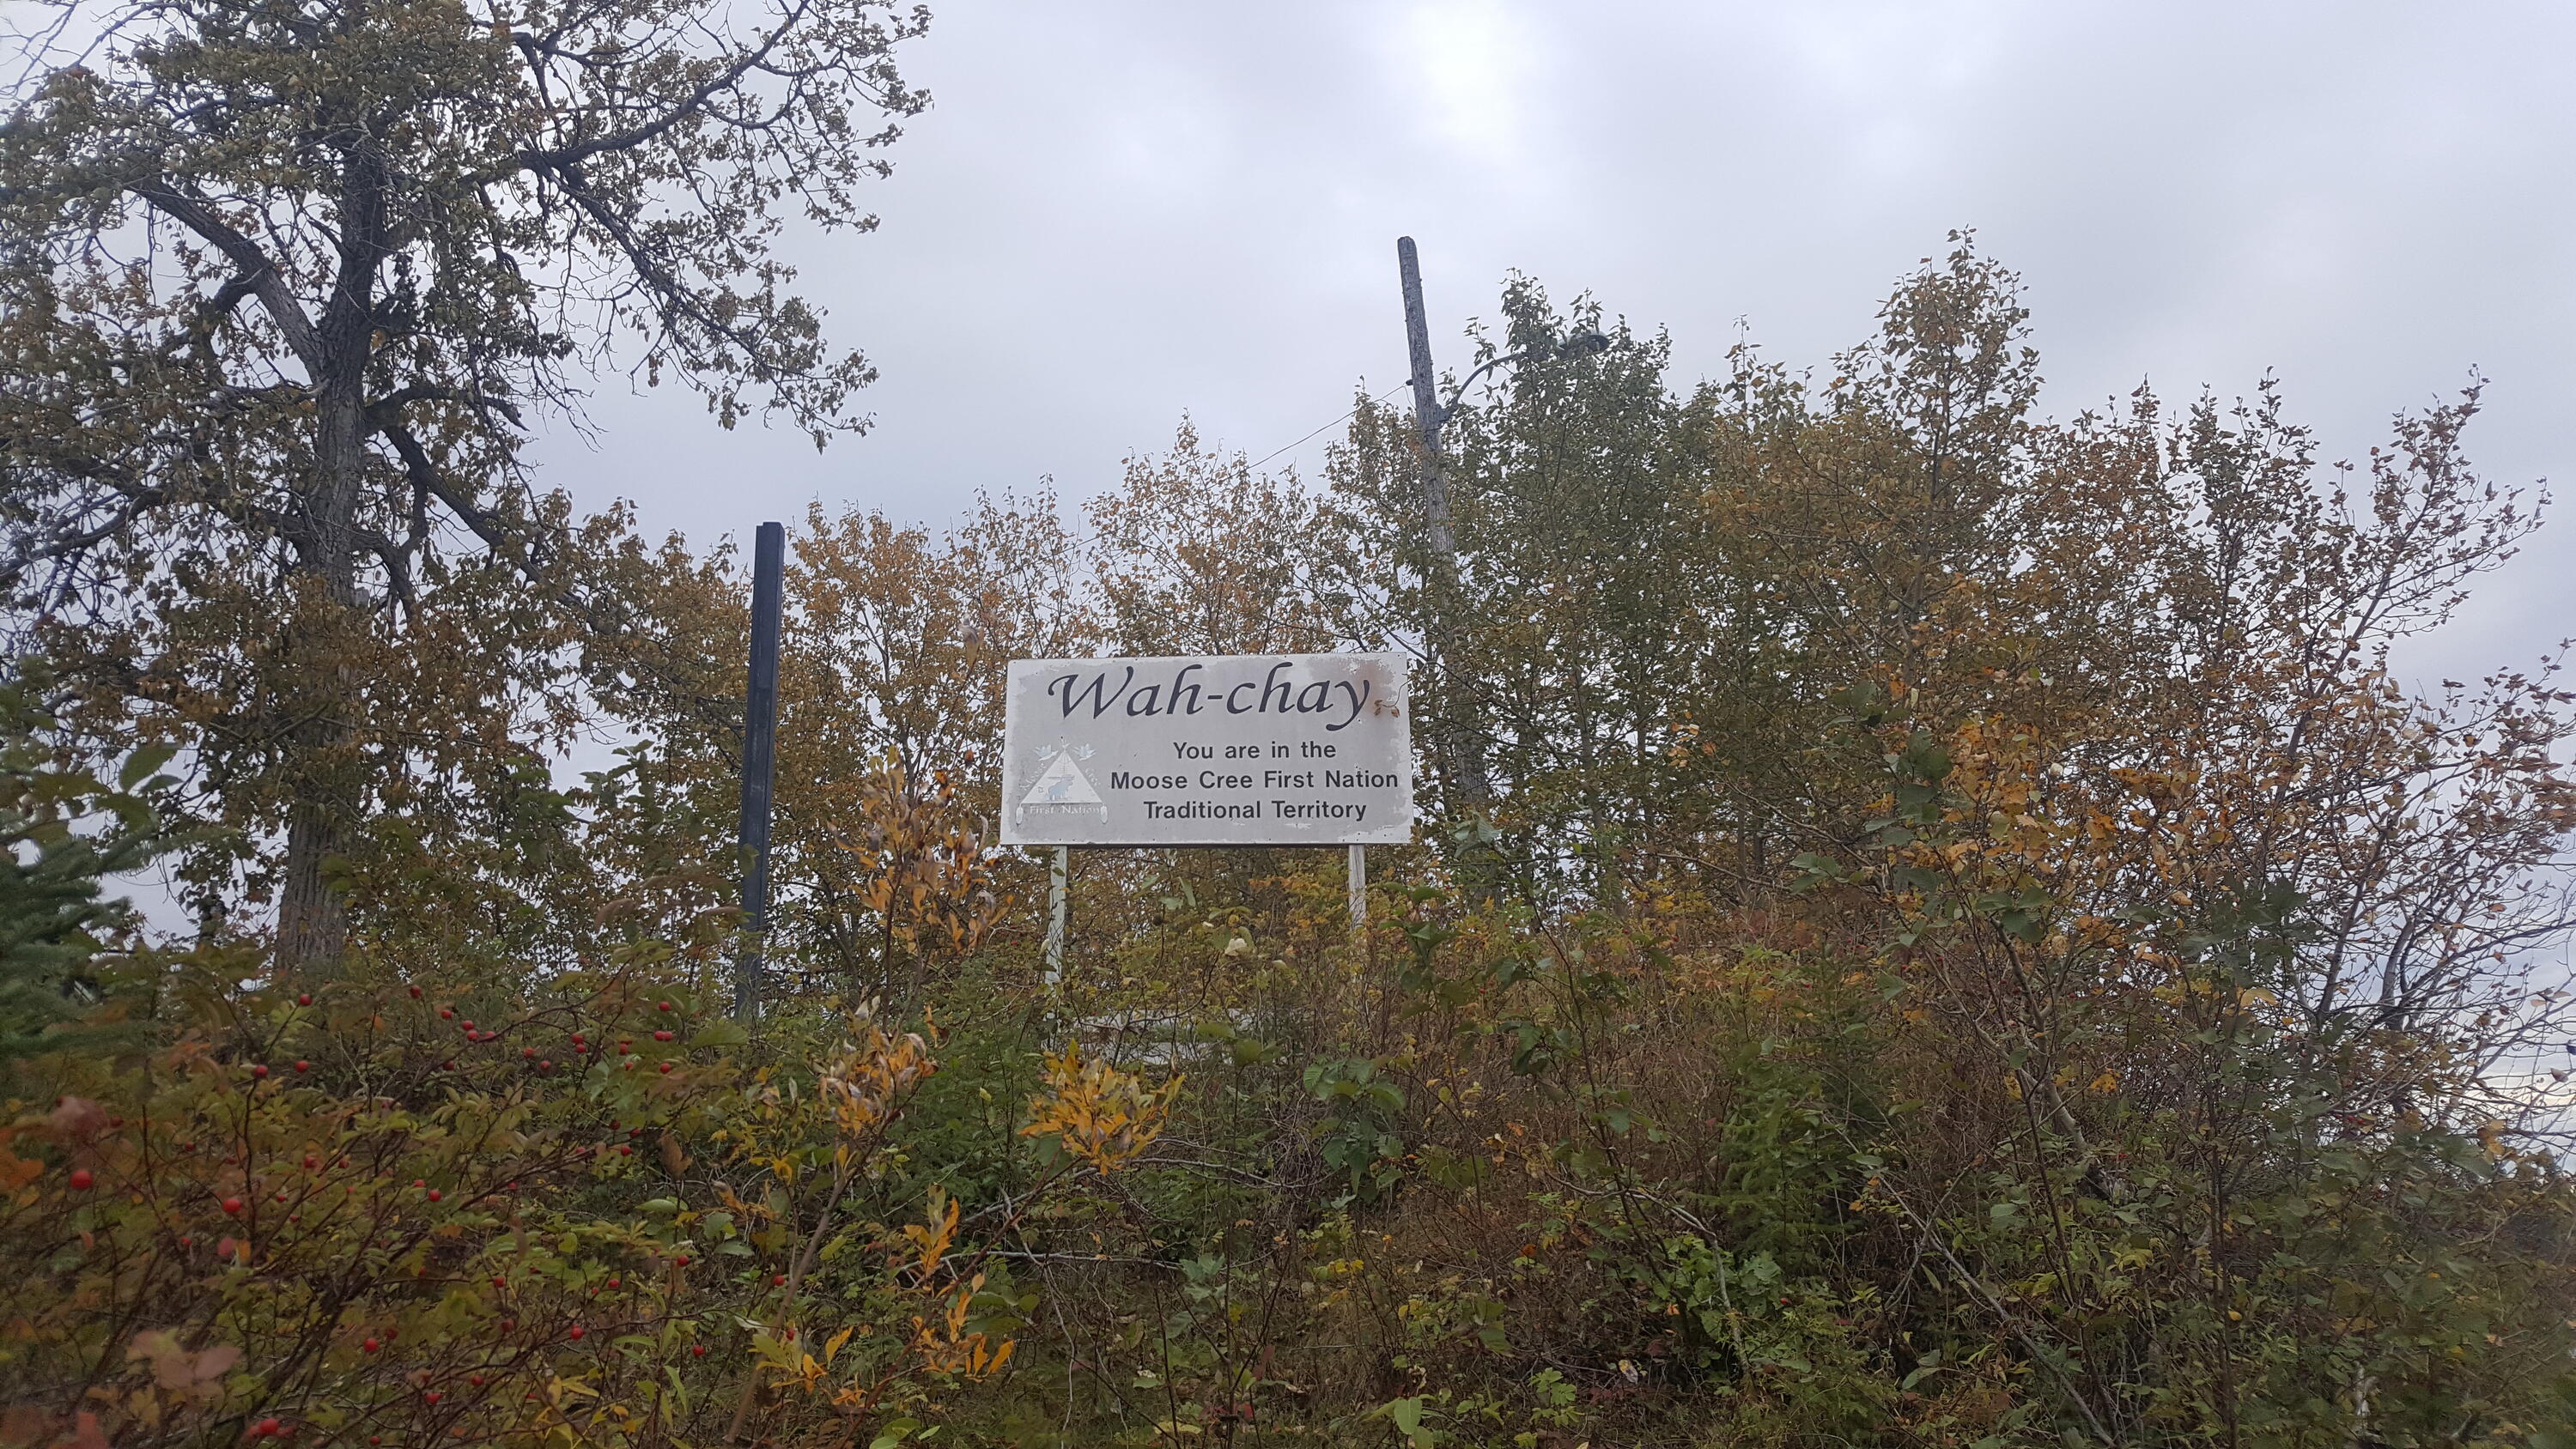 A sign that says 'Wah-chay you are in the Moose Cree First Nation Traditional Territory'